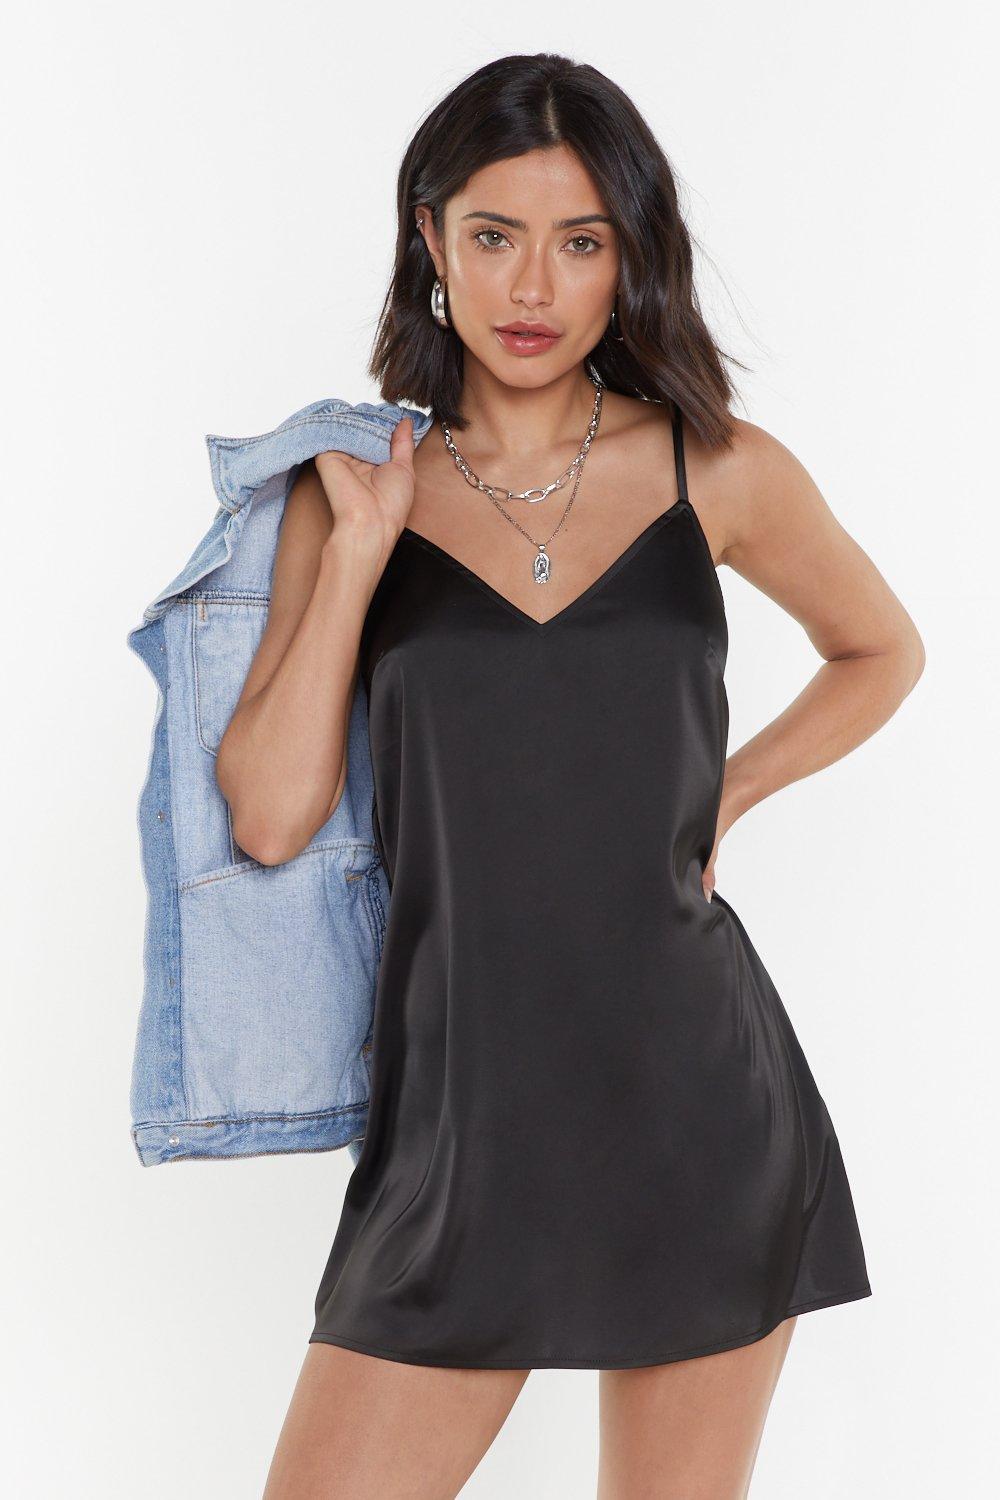 Where can I find a V-neck satin mini dress like this? I'm 5'0 and size 0 :  r/PetiteFashionAdvice